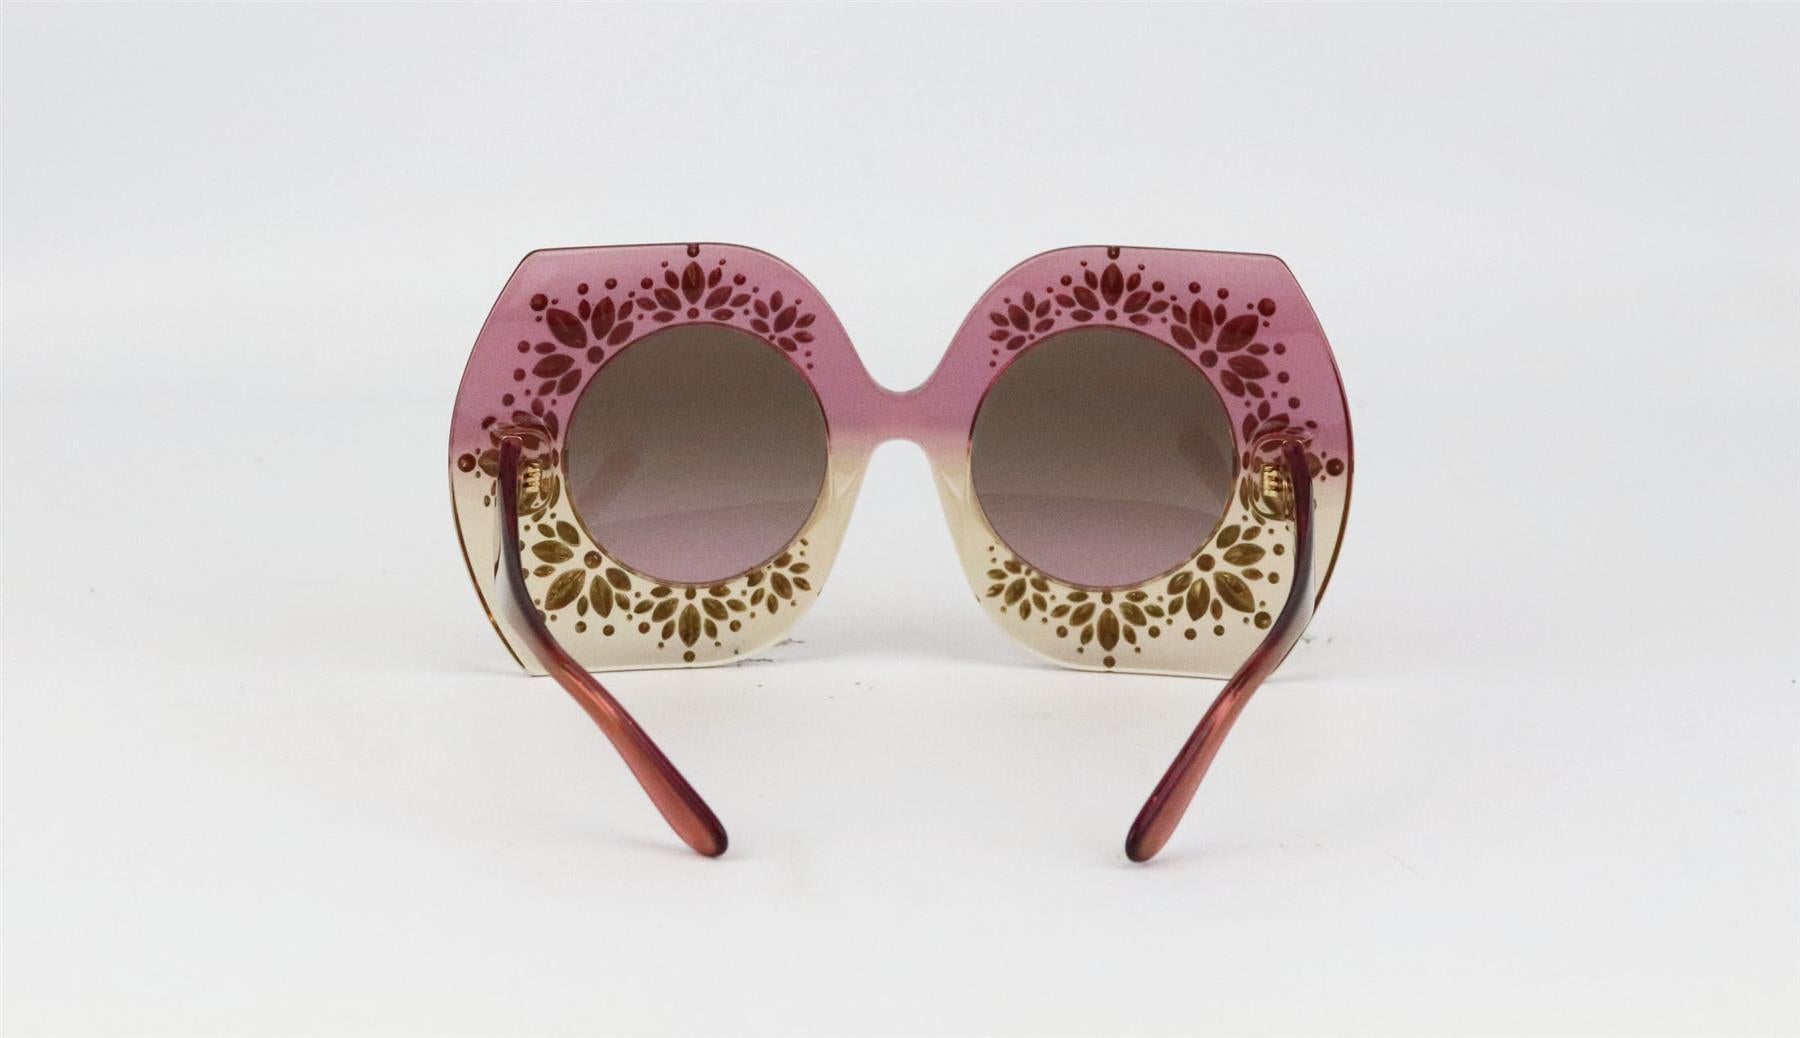 These iconic sunglasses by Dolce & Gabbana are made in Italy from glossy semi-sheer tonal-pink acetate and detail with crystal-embellishment throughout, they have an oversized square frame silhouette that is particularly flatter for your face.